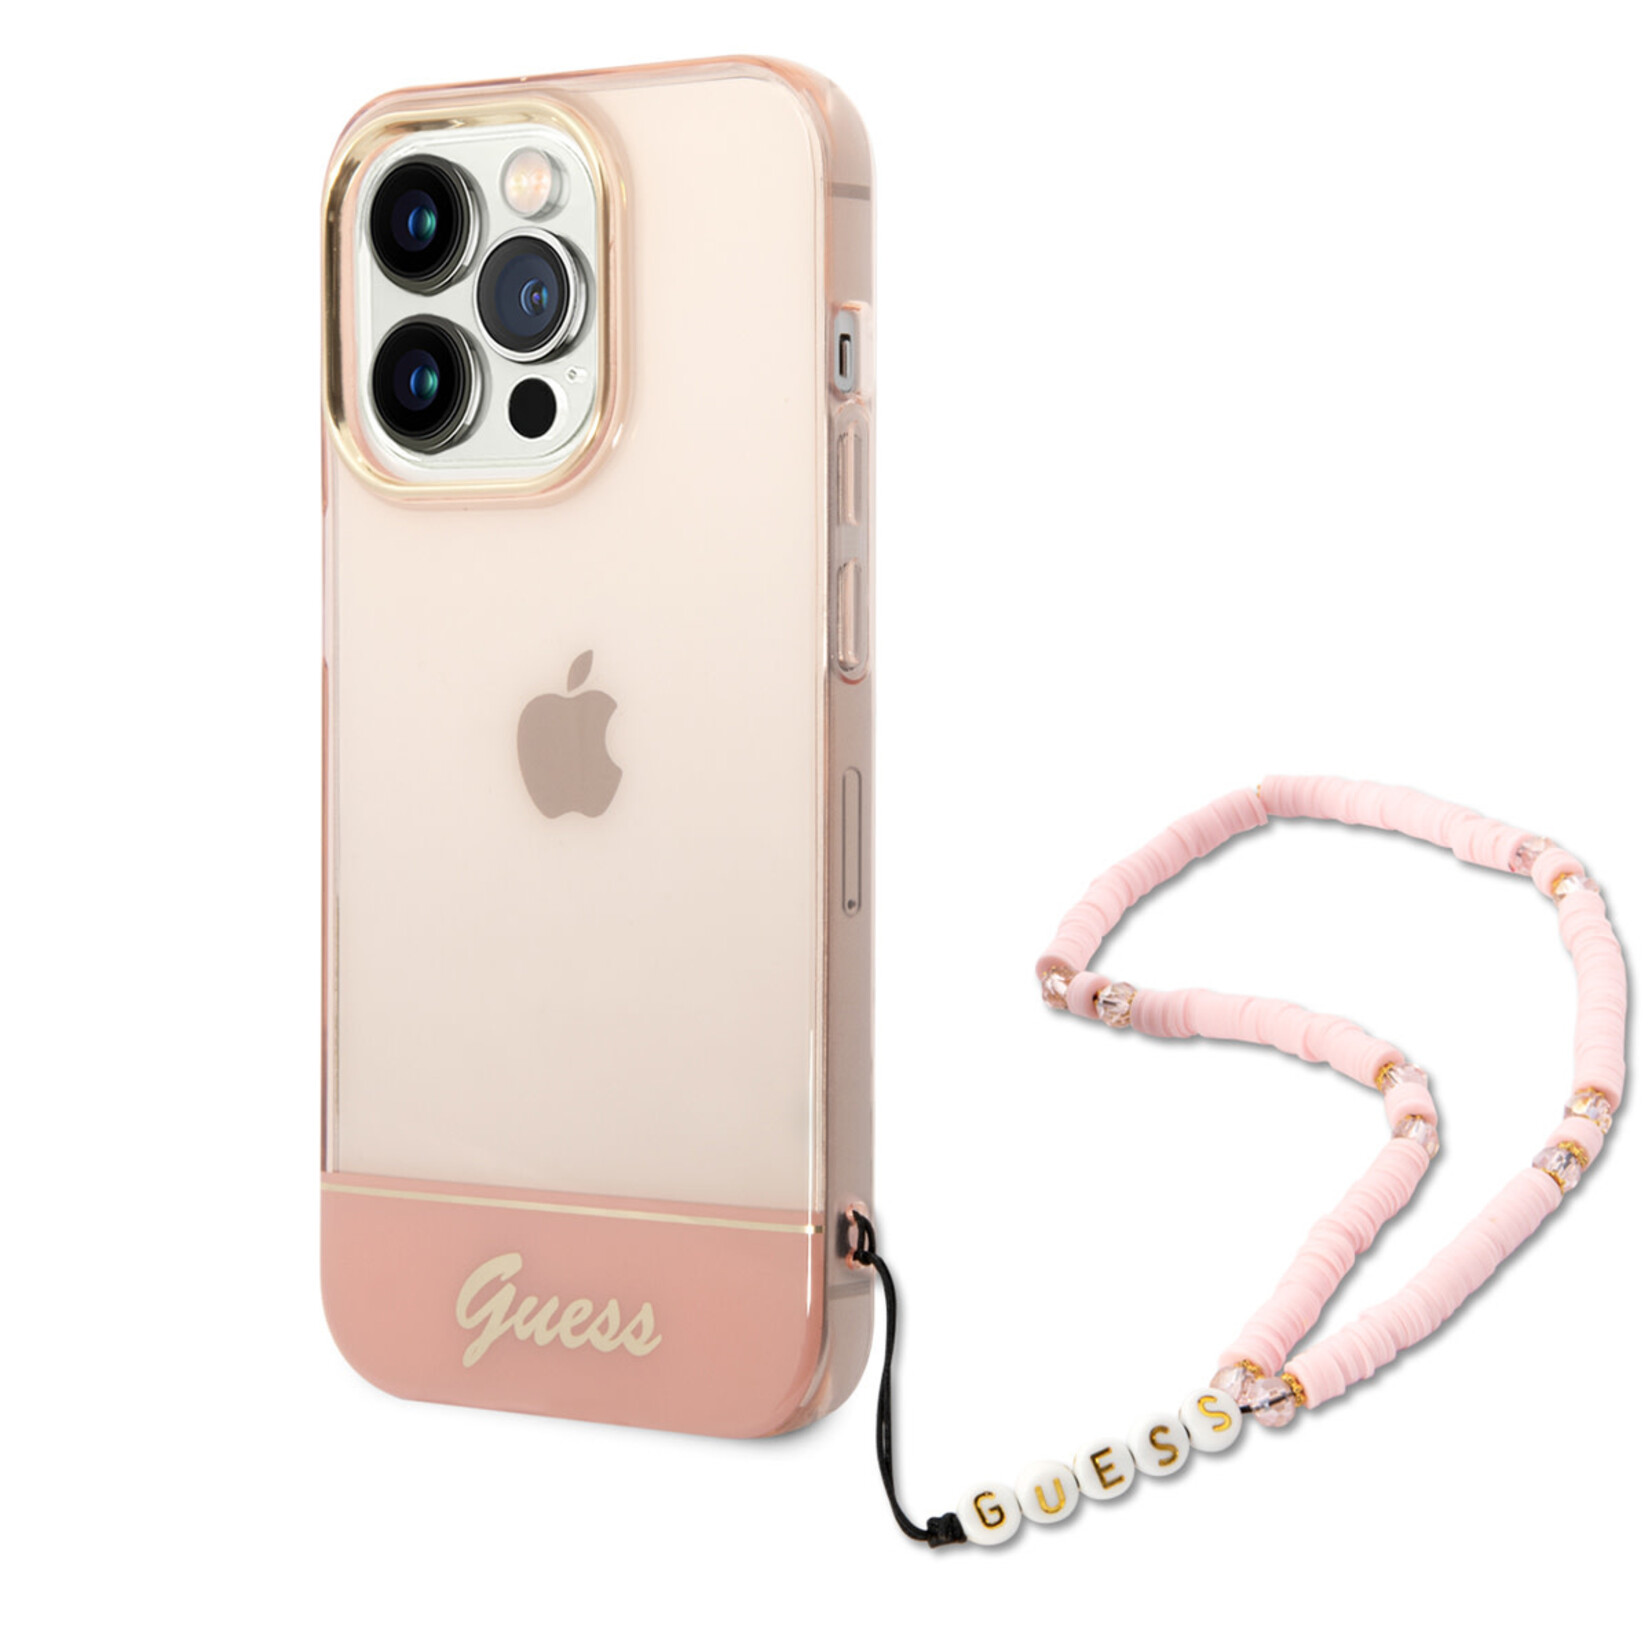 Guess Guess Transparante Roze TPU Back Cover Smartphonehoesje voor Apple iPhone 14 Pro - Bescherming & Stijl